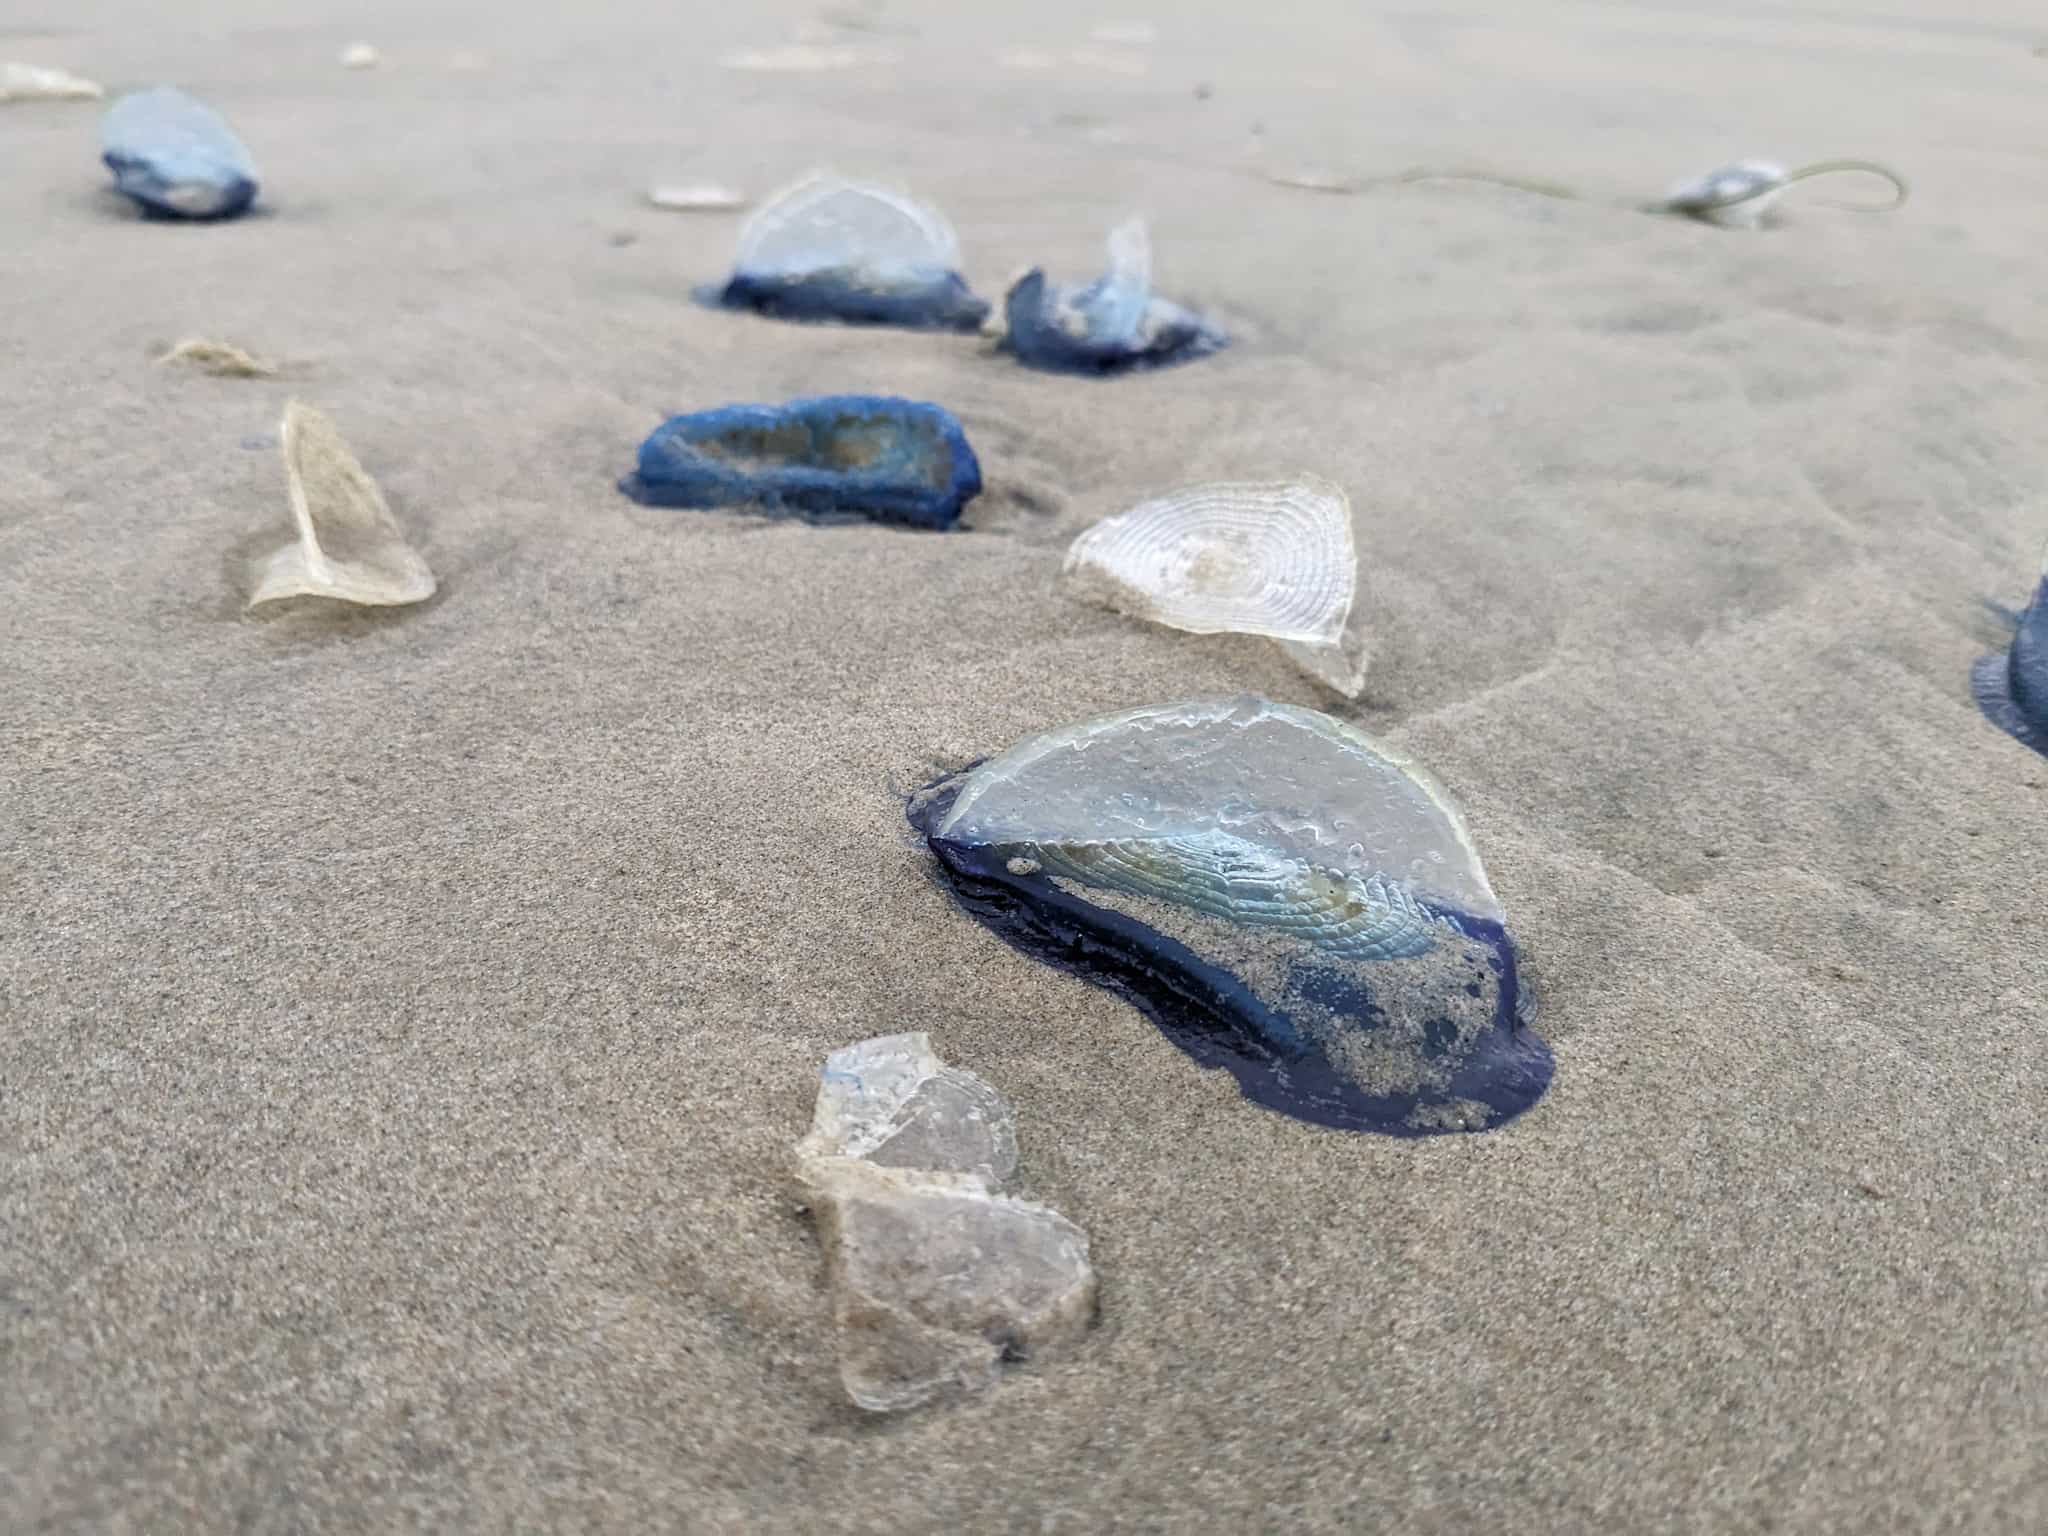 Multiple blue and clear jellyfish like discs on a beach.